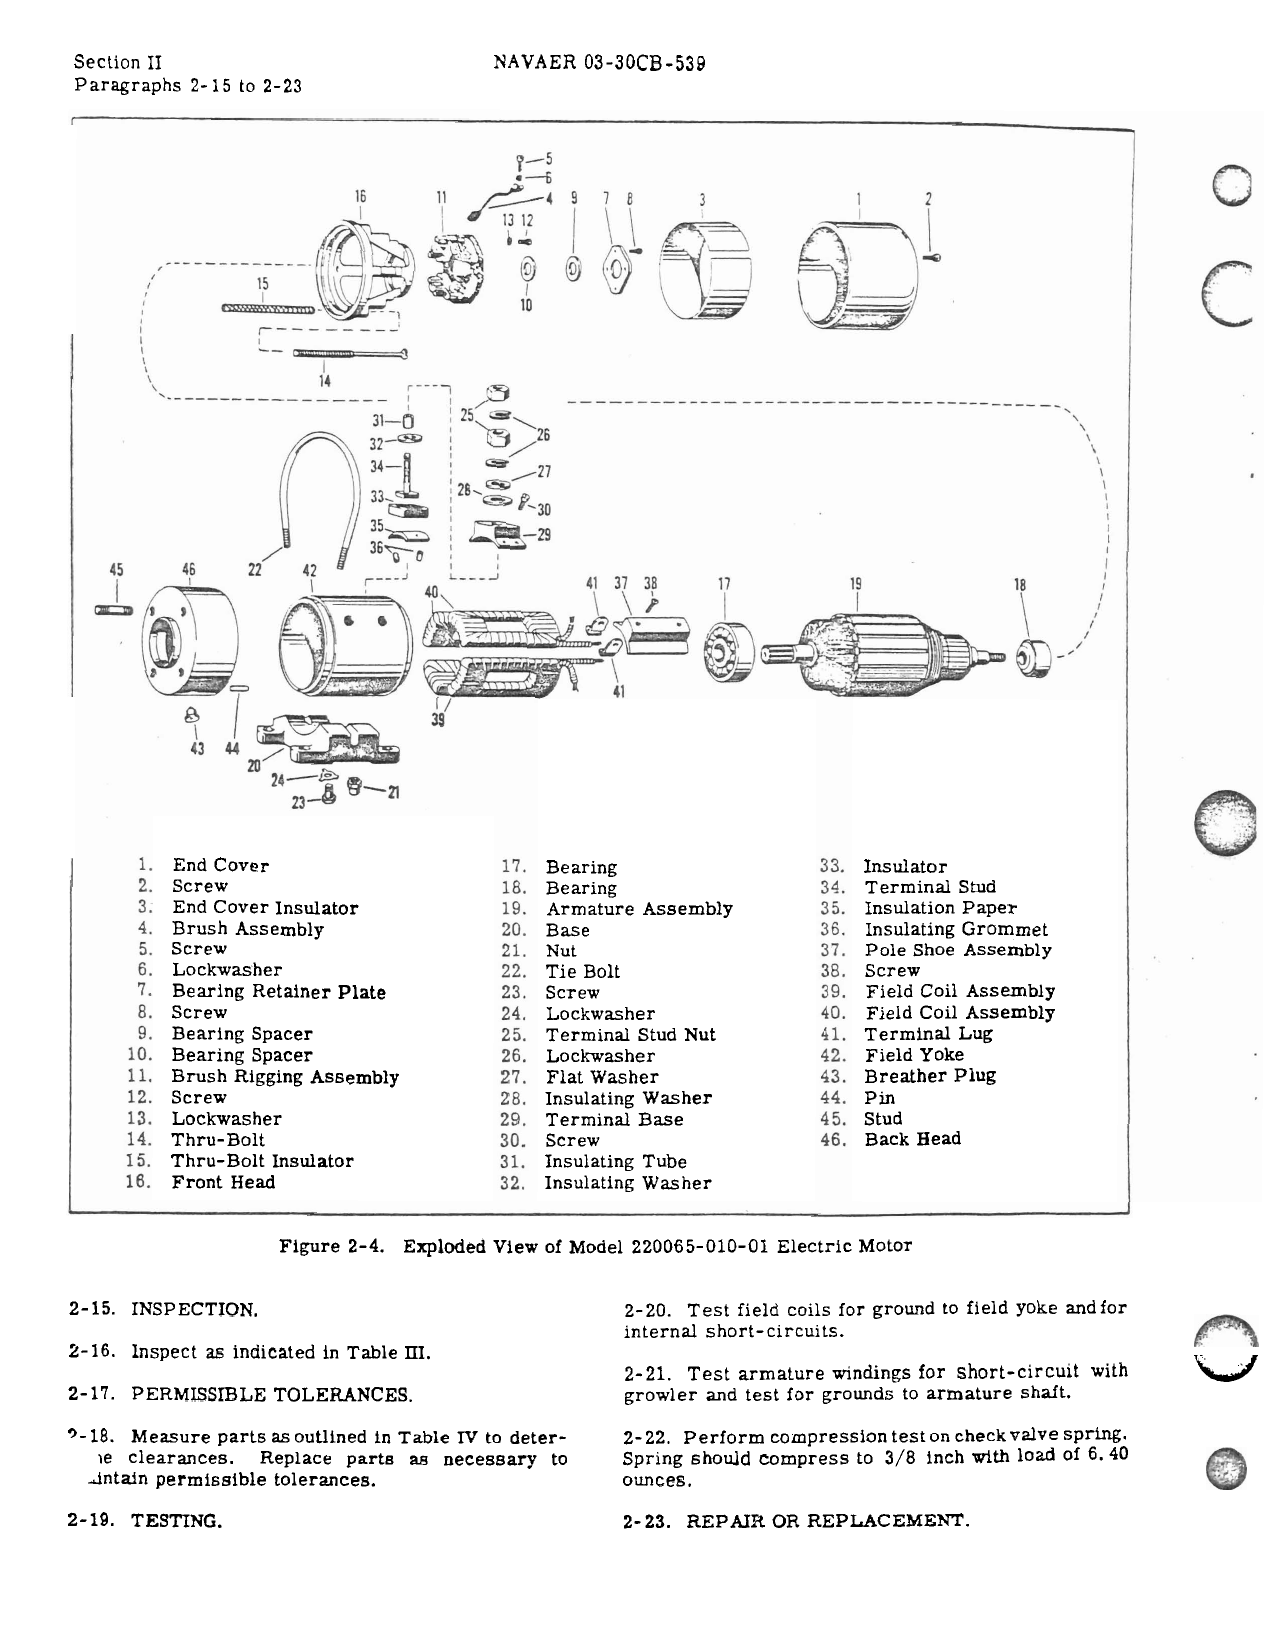 Sample page 7 from AirCorps Library document: Overhaul Instructions for Electric Motor-Driven Hydraulic Gear Type Pump - 111069 Series